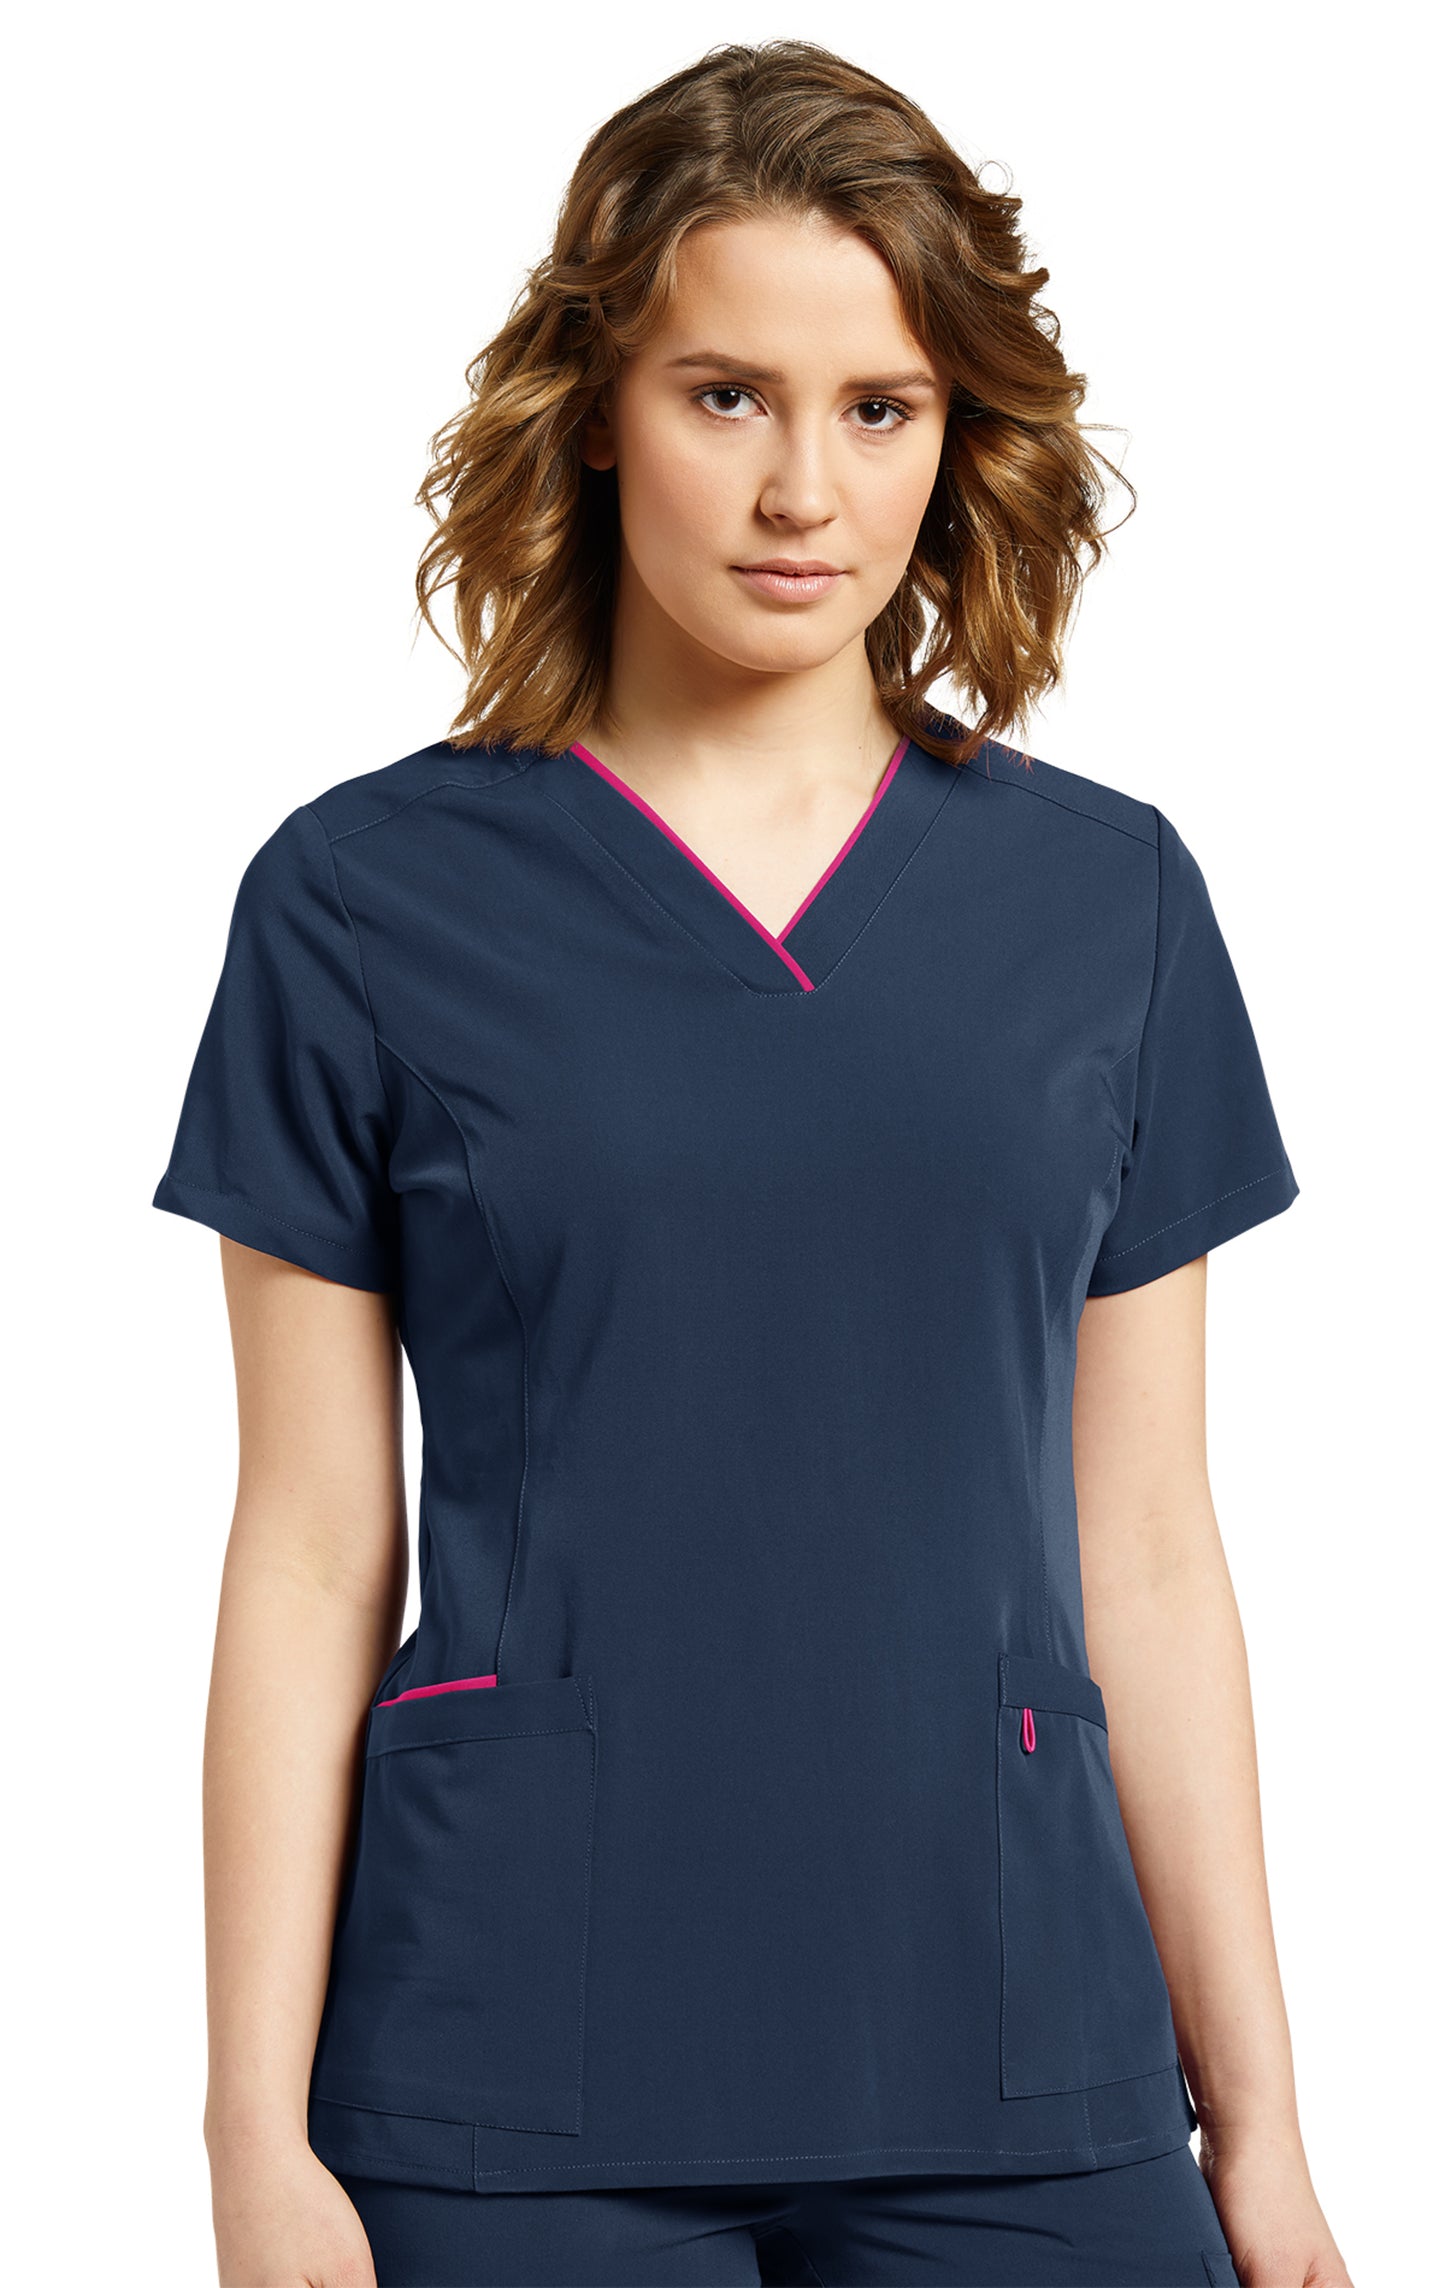 755 Marvella by White Cross Soft Comfortable Scrub Top for Women with Contrast Trim